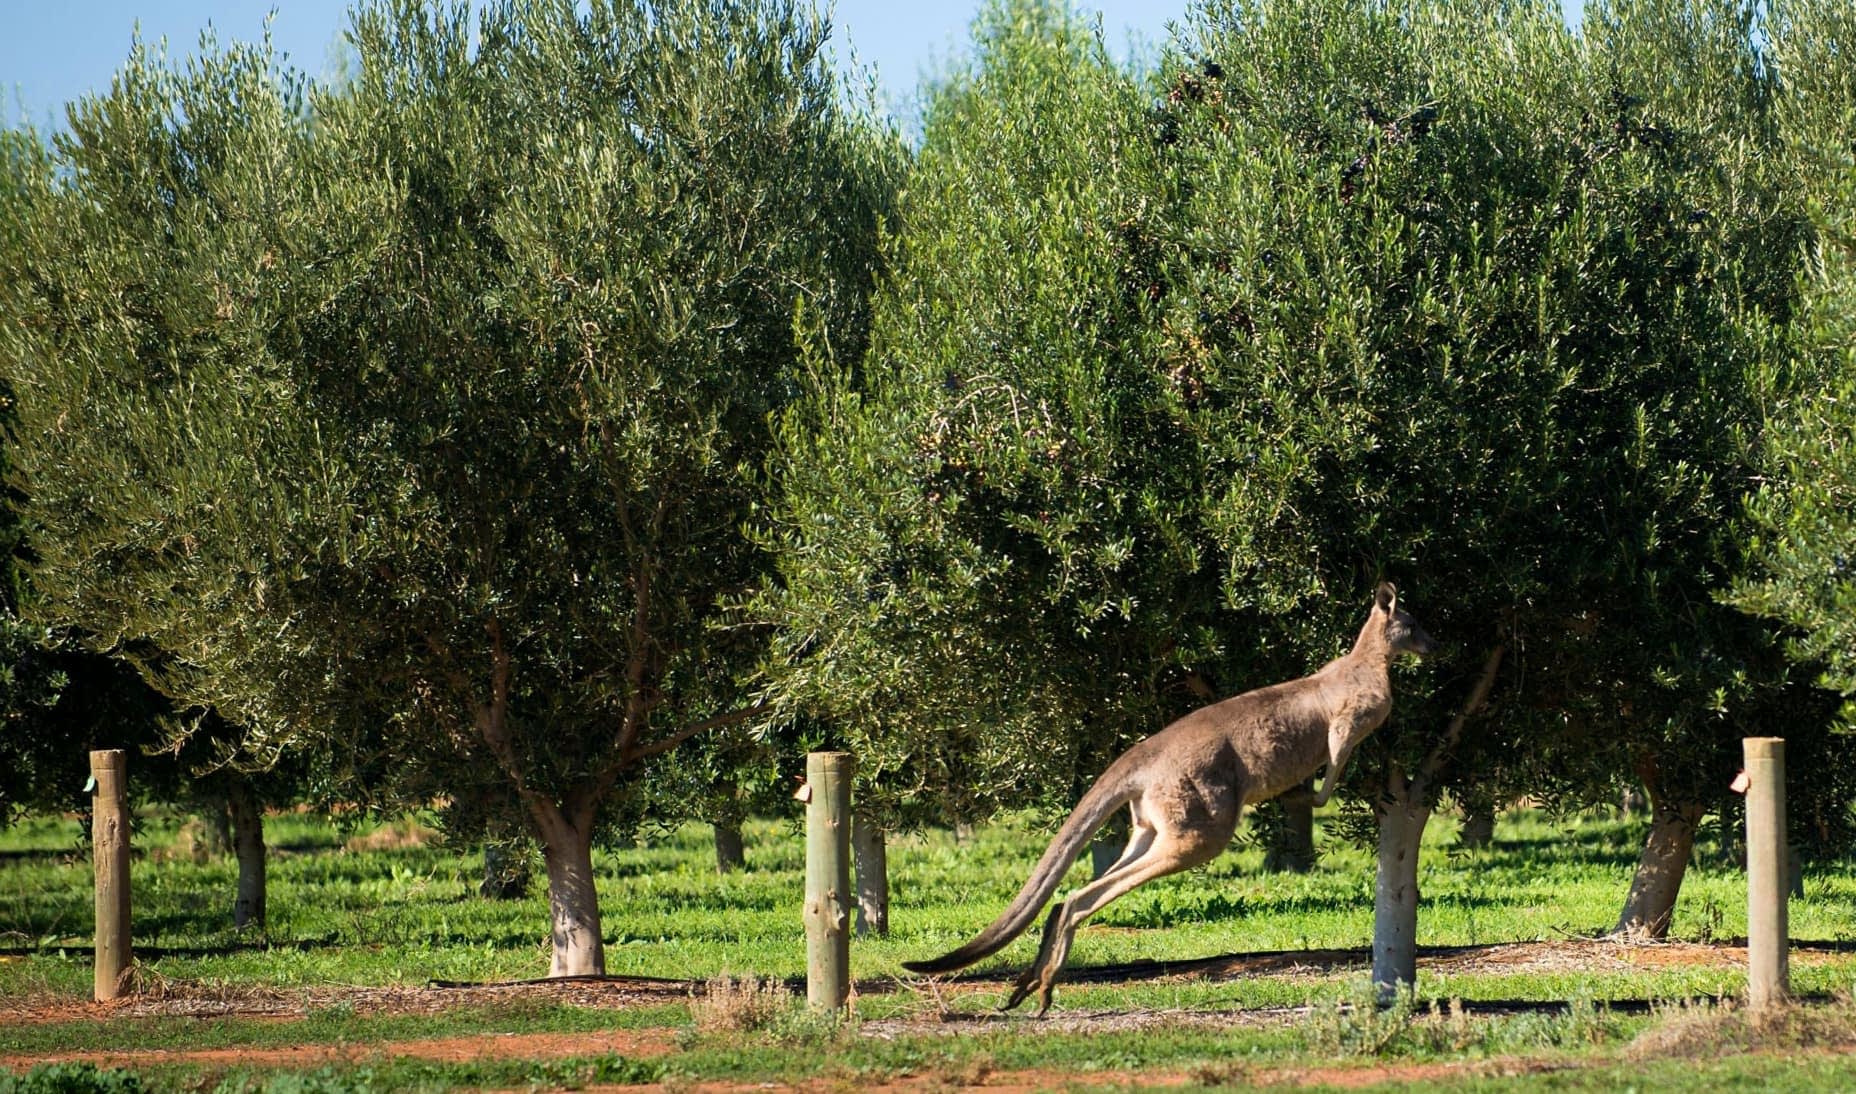 production-business-australia-and-new-zealand-australian-producers-face-mixed-fortunes-olive-oil-times